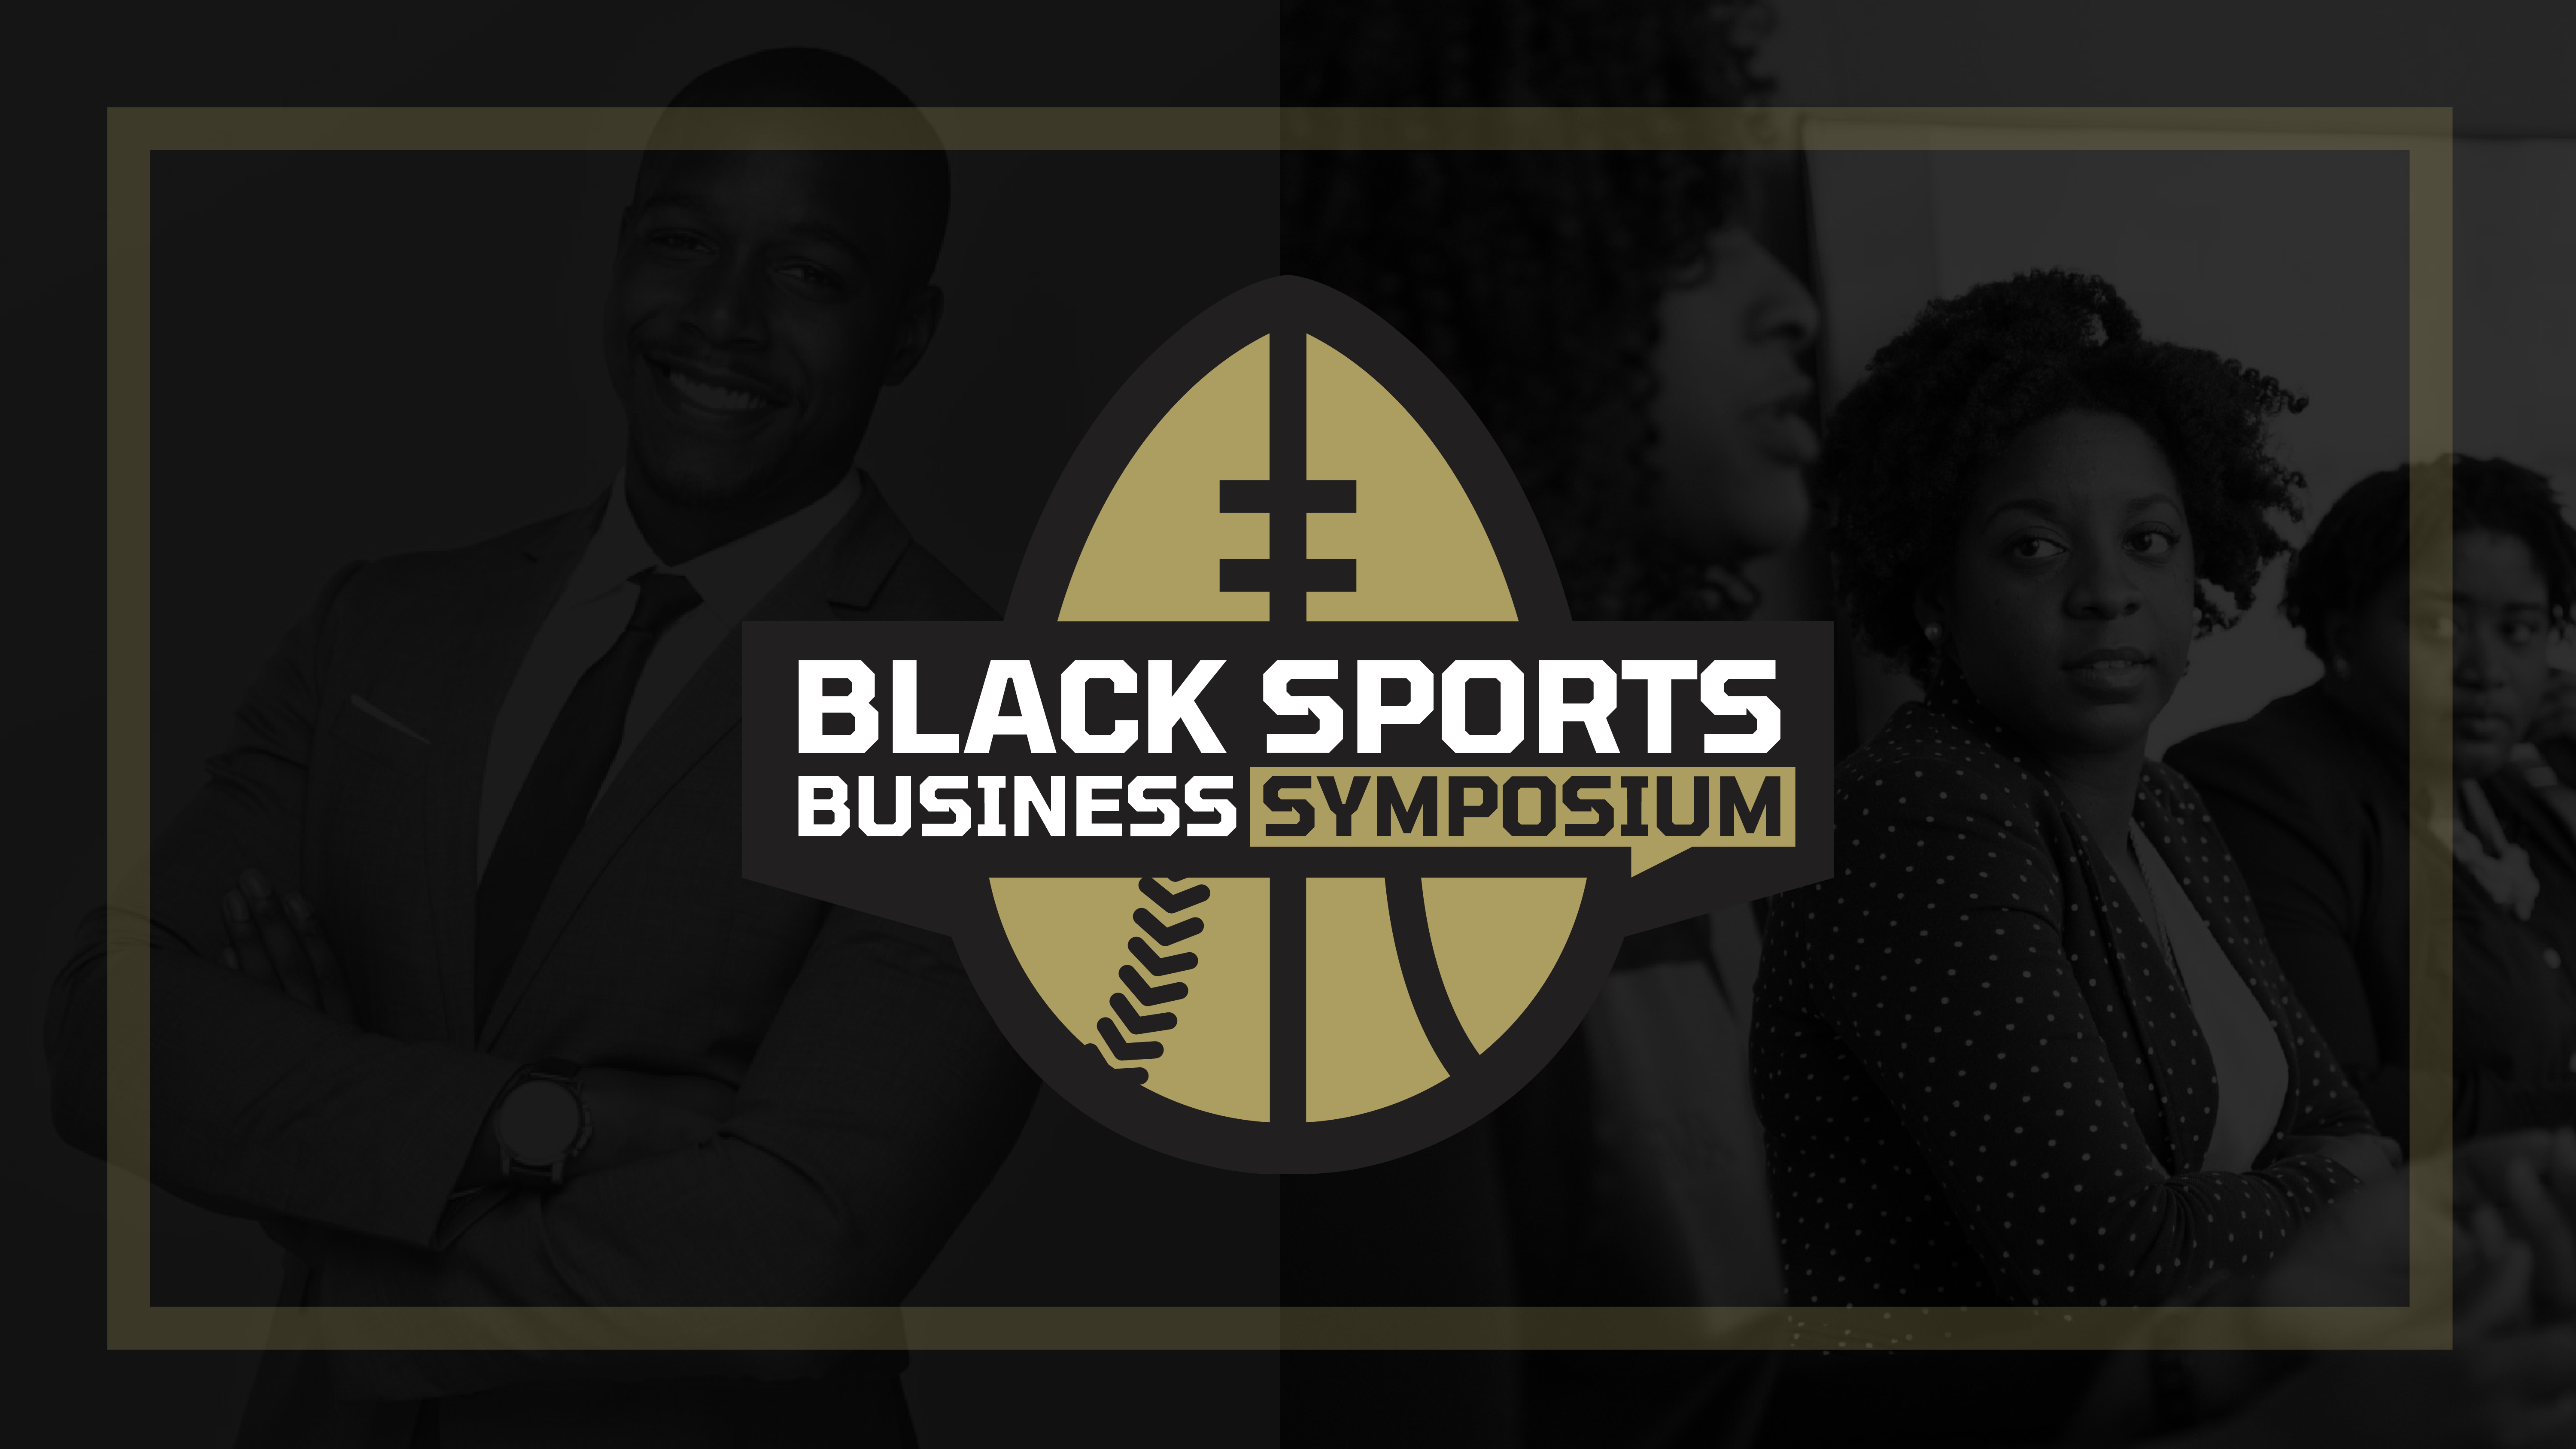 Black Sports Business Symposium Announces All-Star Speaker Lineup Including Rich Paul, Maria Taylor, TJ Adeshola & More